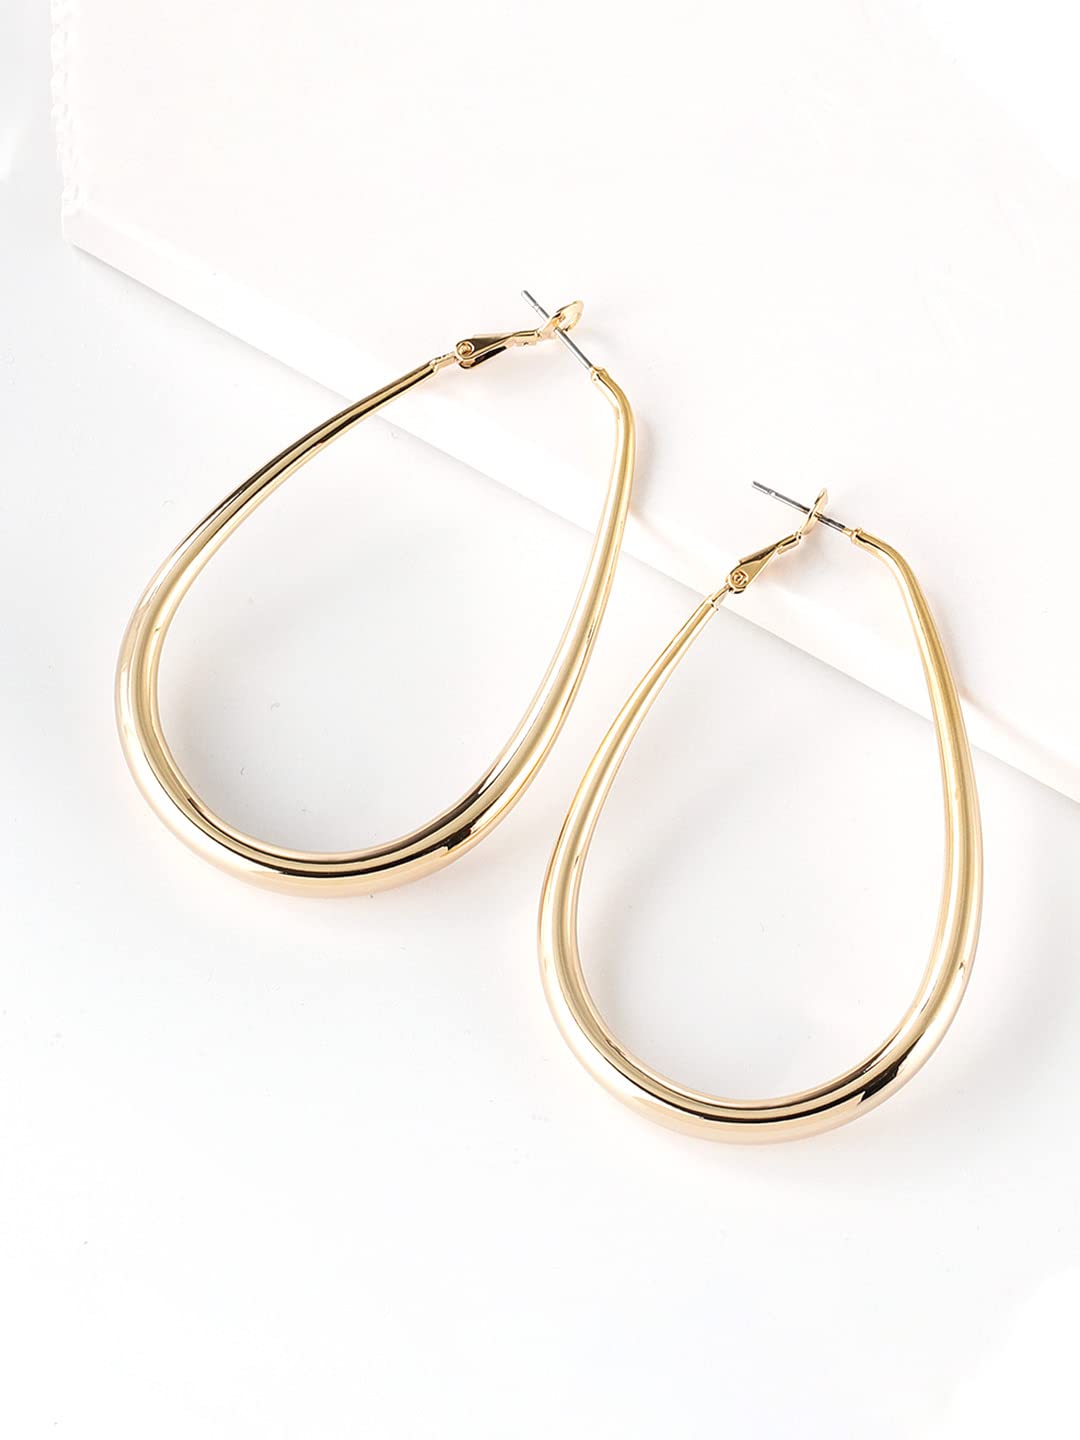 Yellow Chimes Earrings for Women and Girls Hoop Earrings for Girls| Gold Plated Oval Shaped Hoop Earrings | Birthday Gift for girls and women Anniversary Gift for Wife